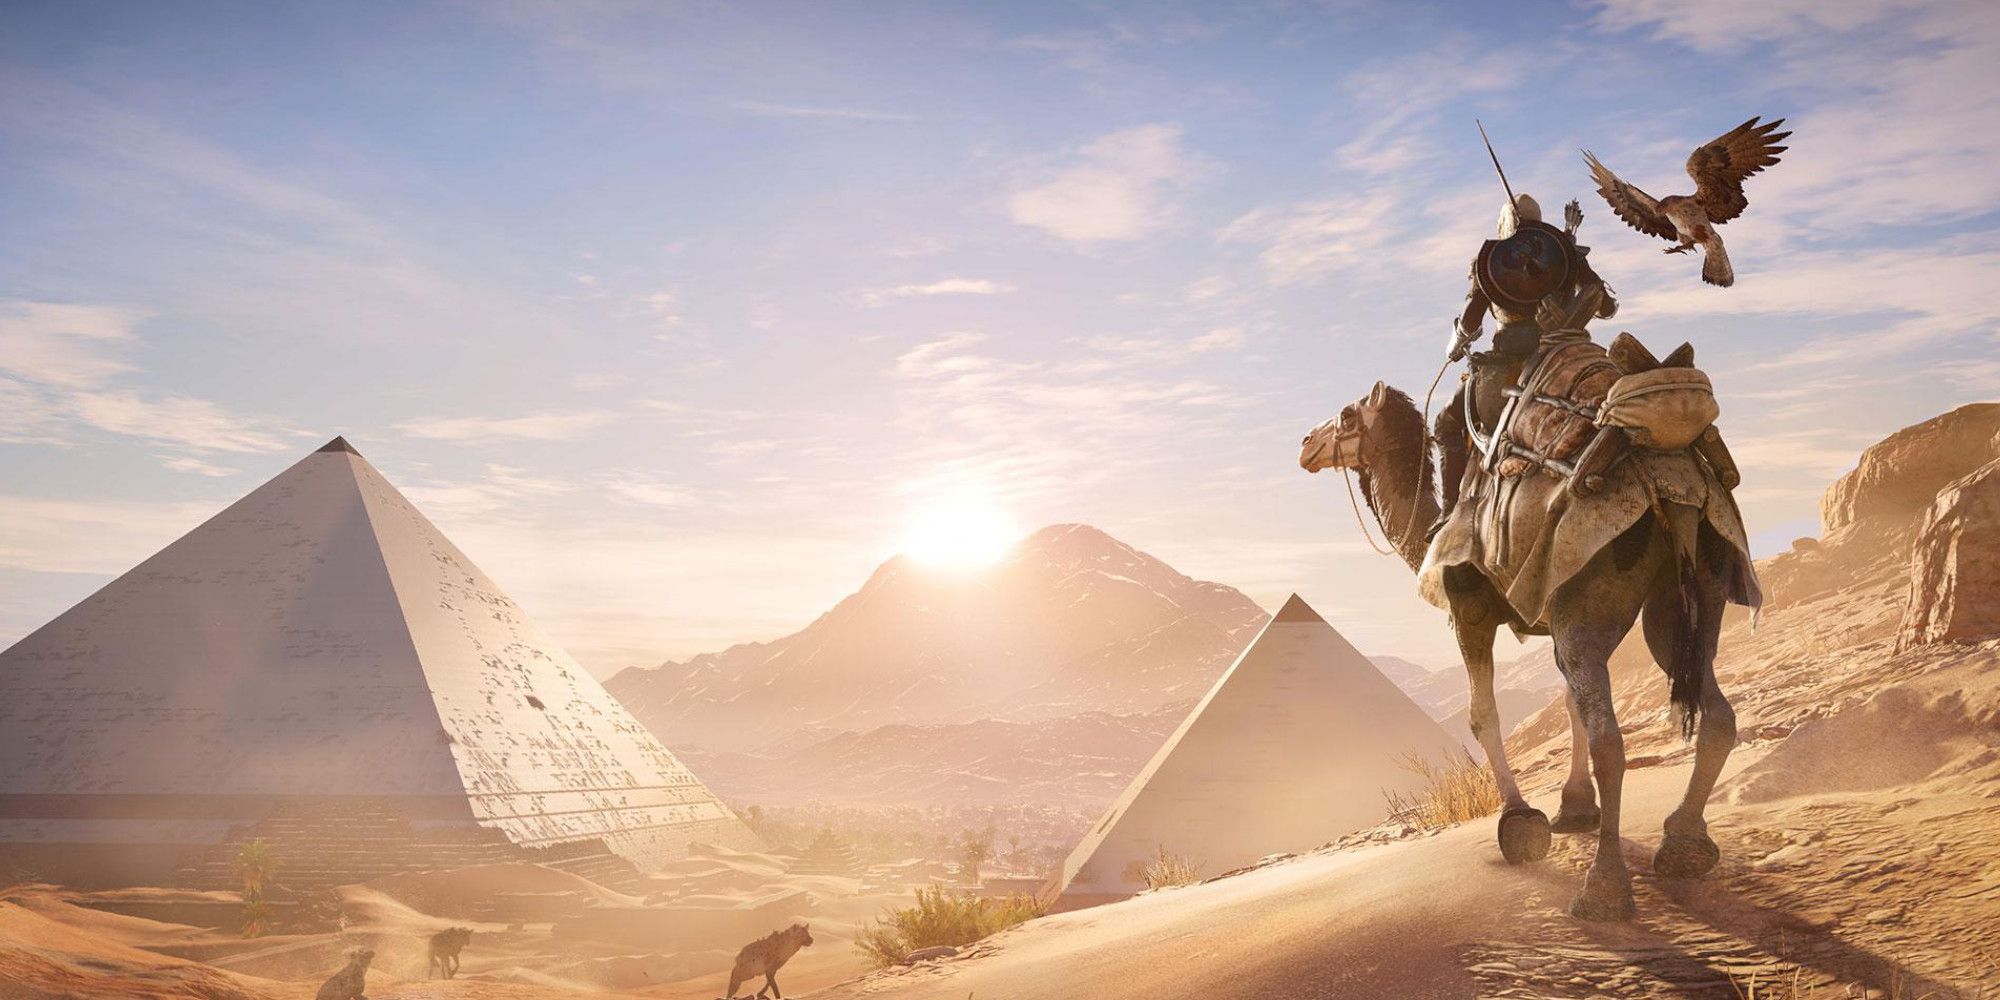 assassin's creed origins bayek on a horse looking at the pyramids